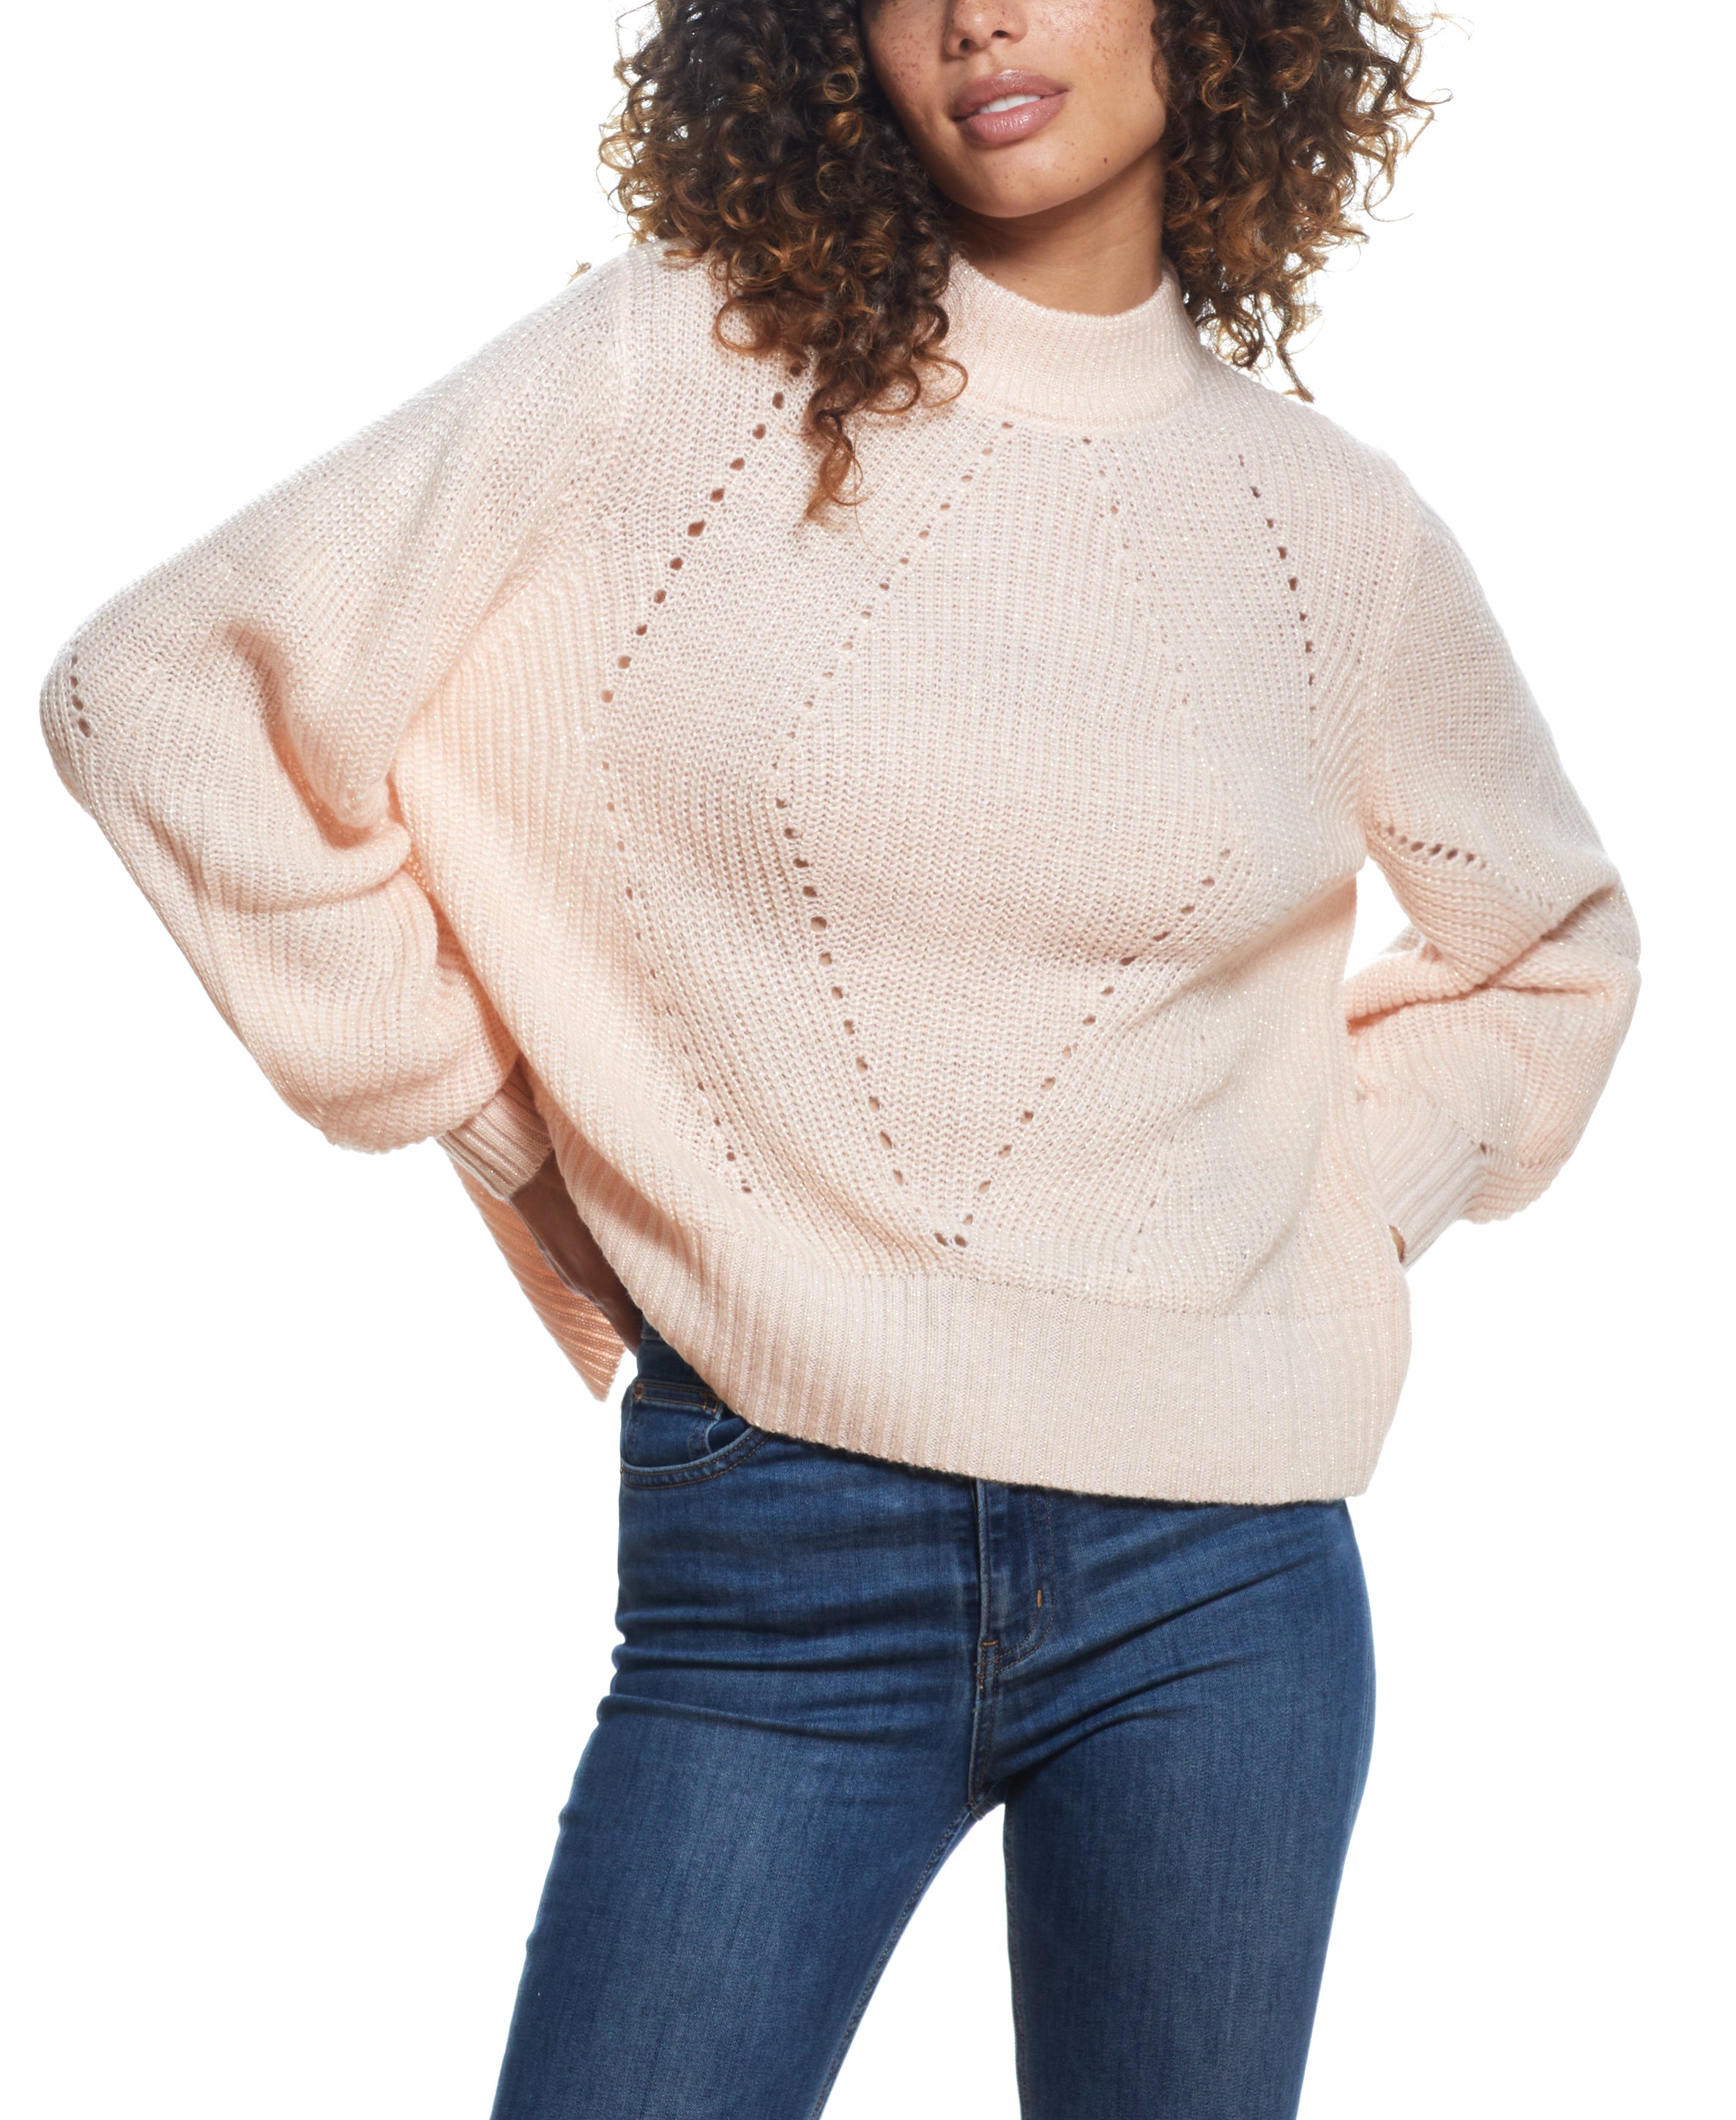 SPARKLY OPEN BACK BALLON SLEEVE MOCK NECK SWEATER in LIGHT PINK